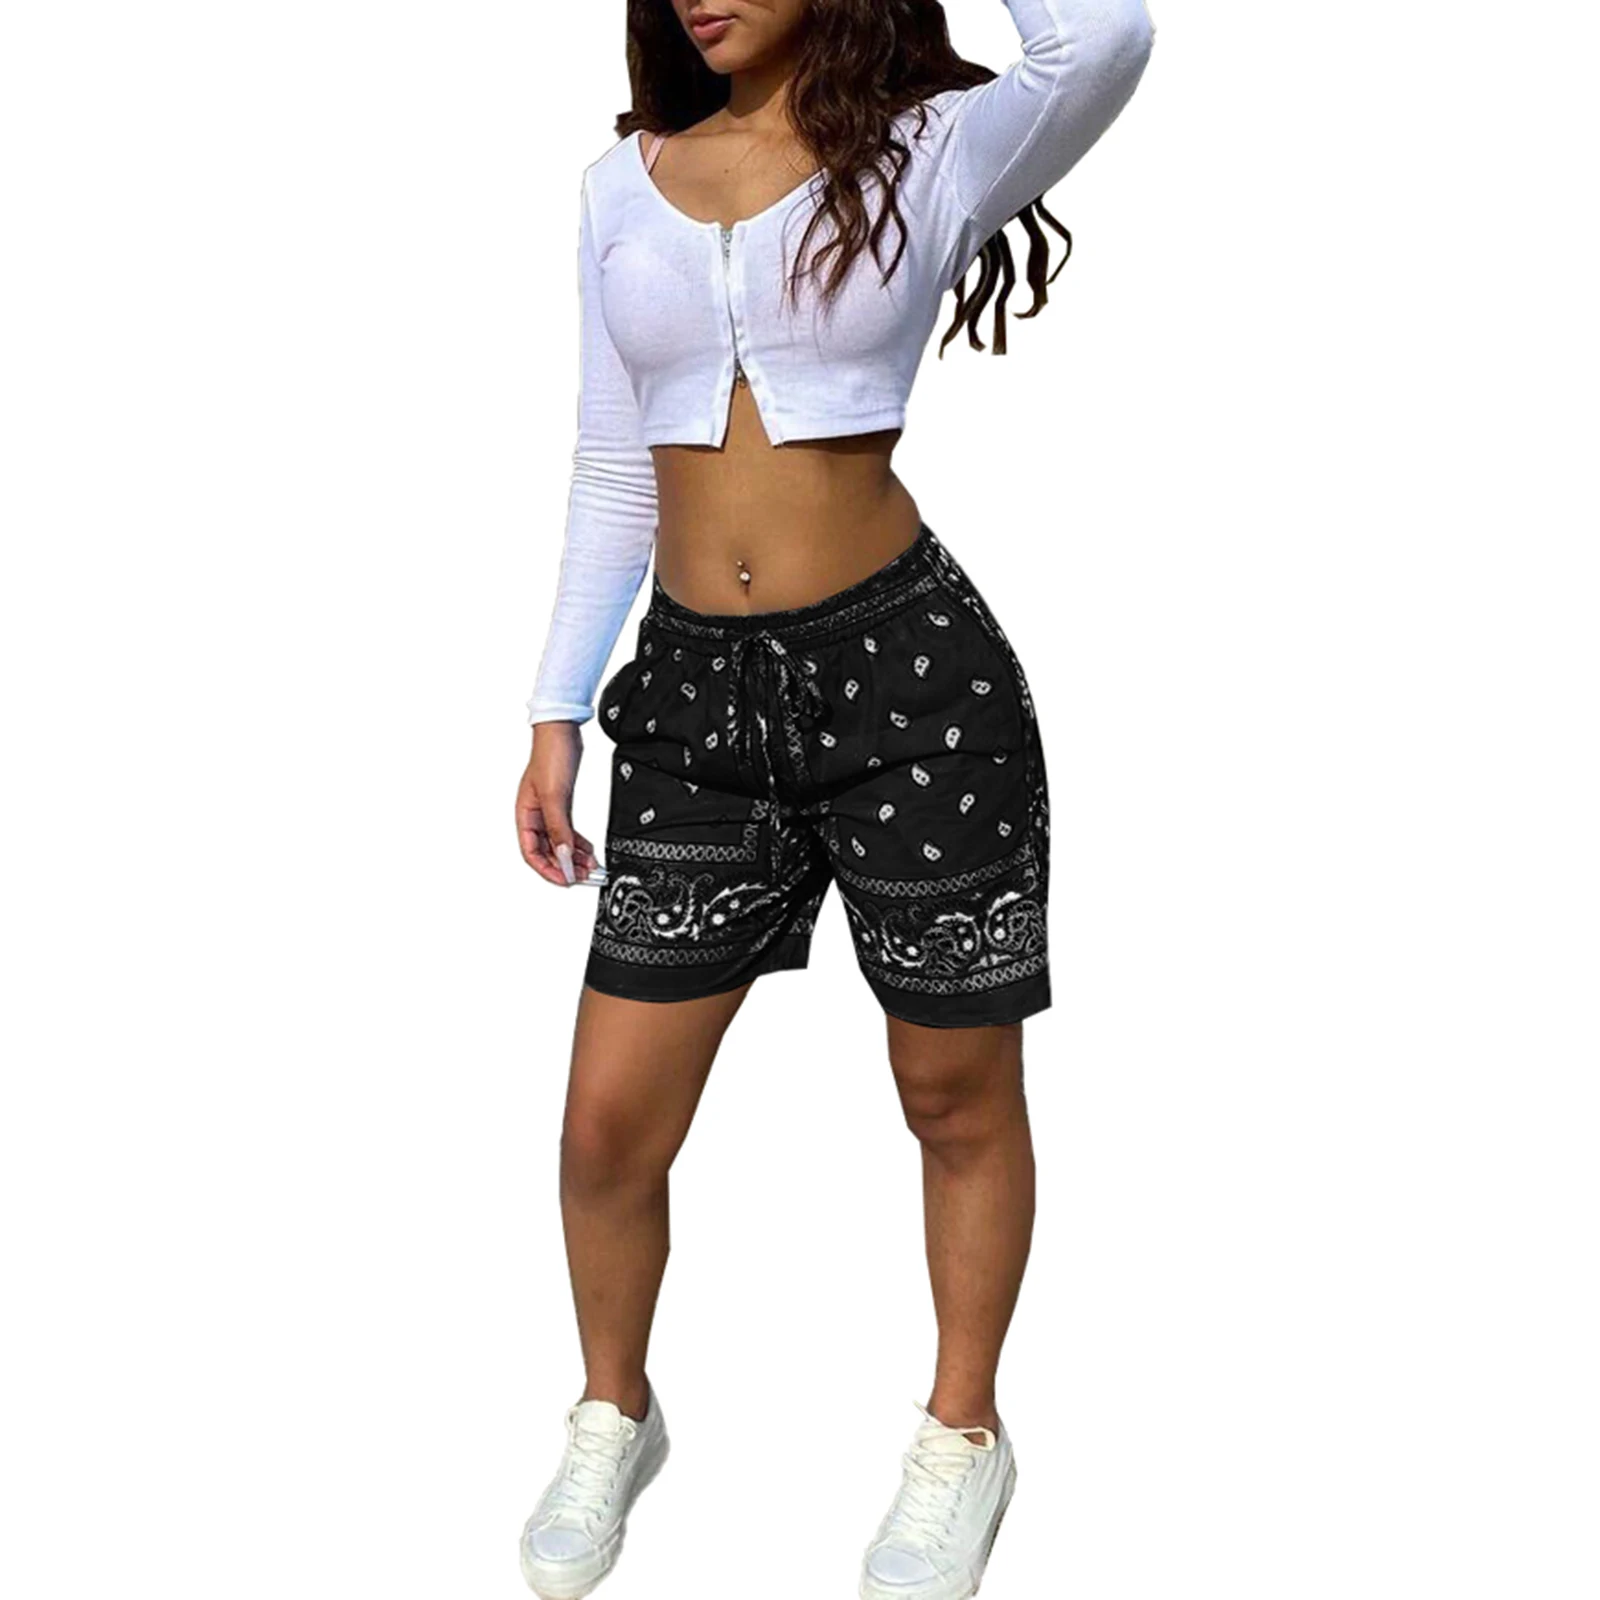 new hooters shorts Women Cashew Printing Stretch short Pants Tight High Waist Hip Hop Style Shorts Casual Loose Lace-up Clothing nike pro shorts